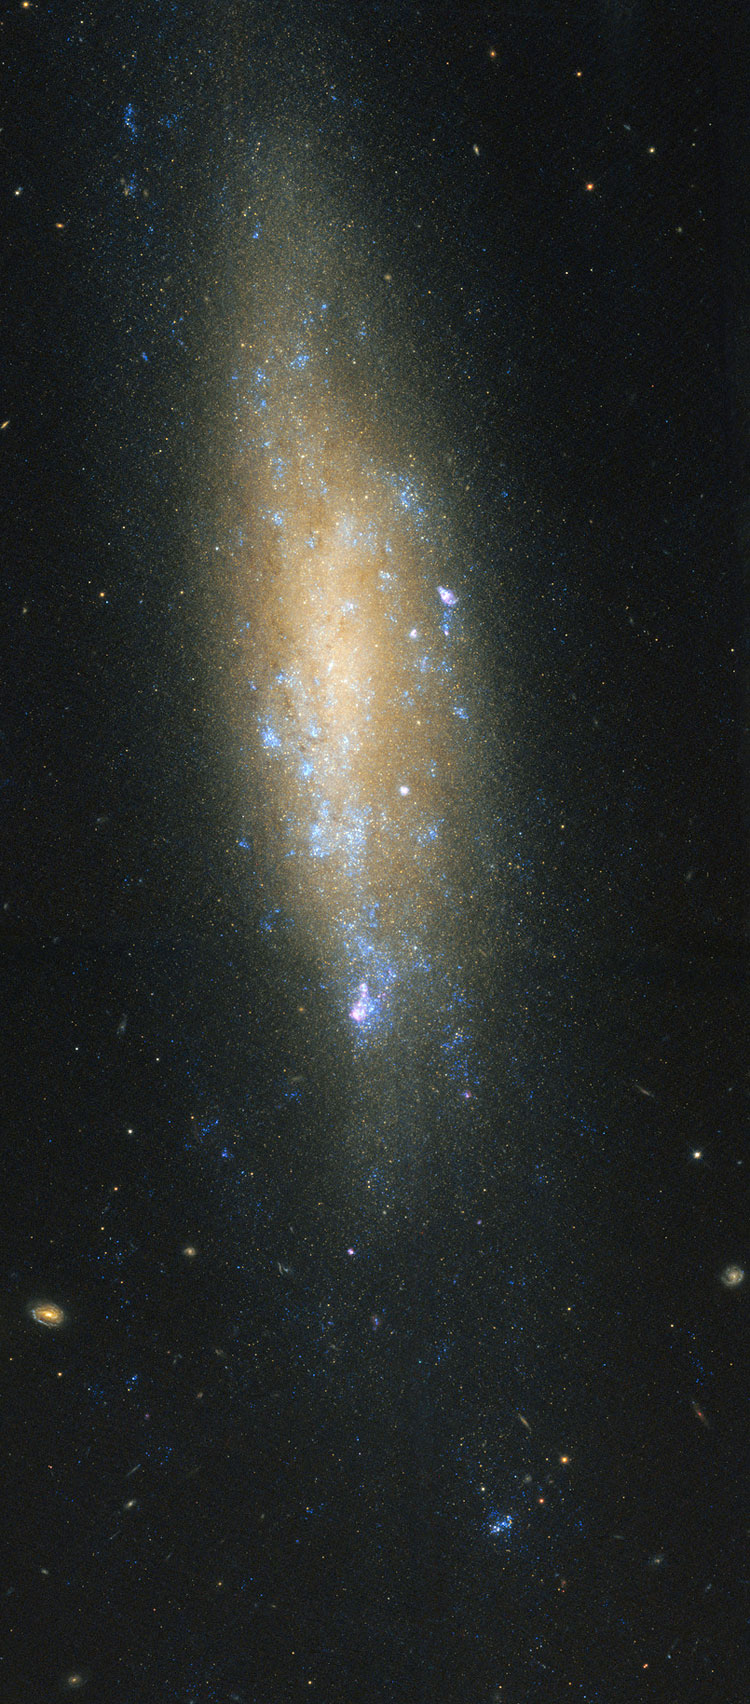 HST image of spiral galaxy NGC 4592